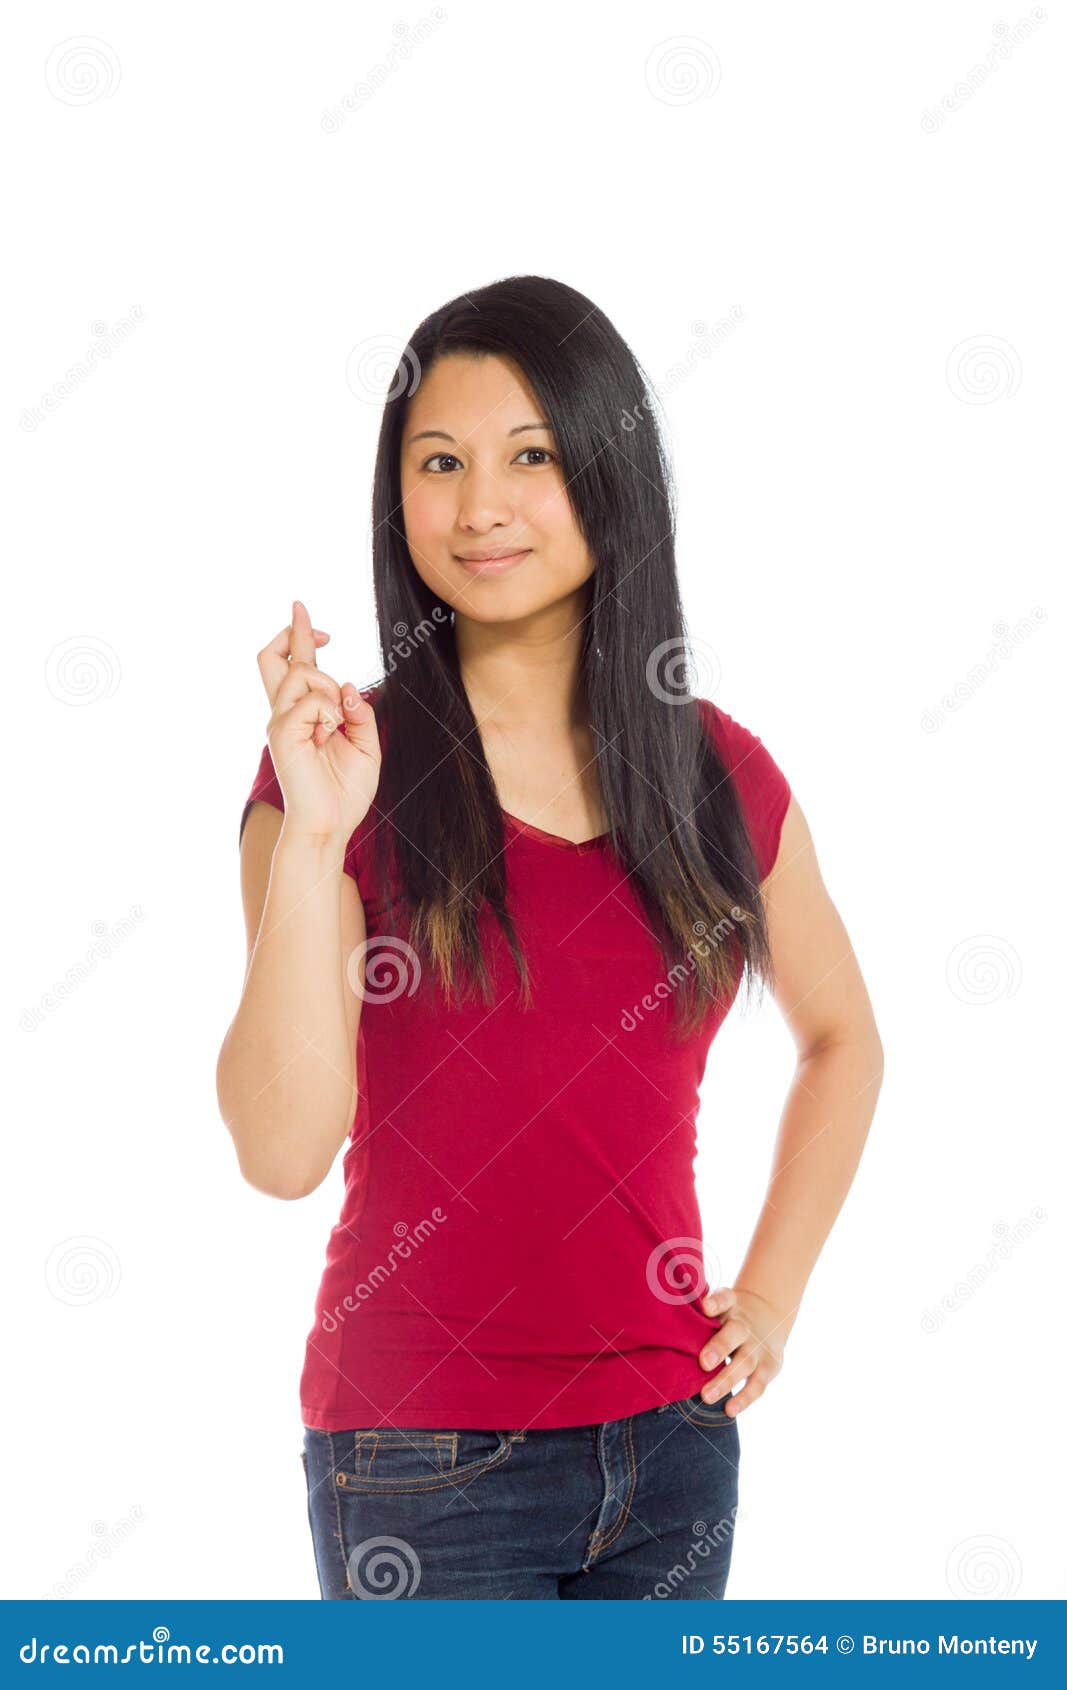 Model Fingers Crossed Wishing Lucky Stock Photo - Image of casual ...